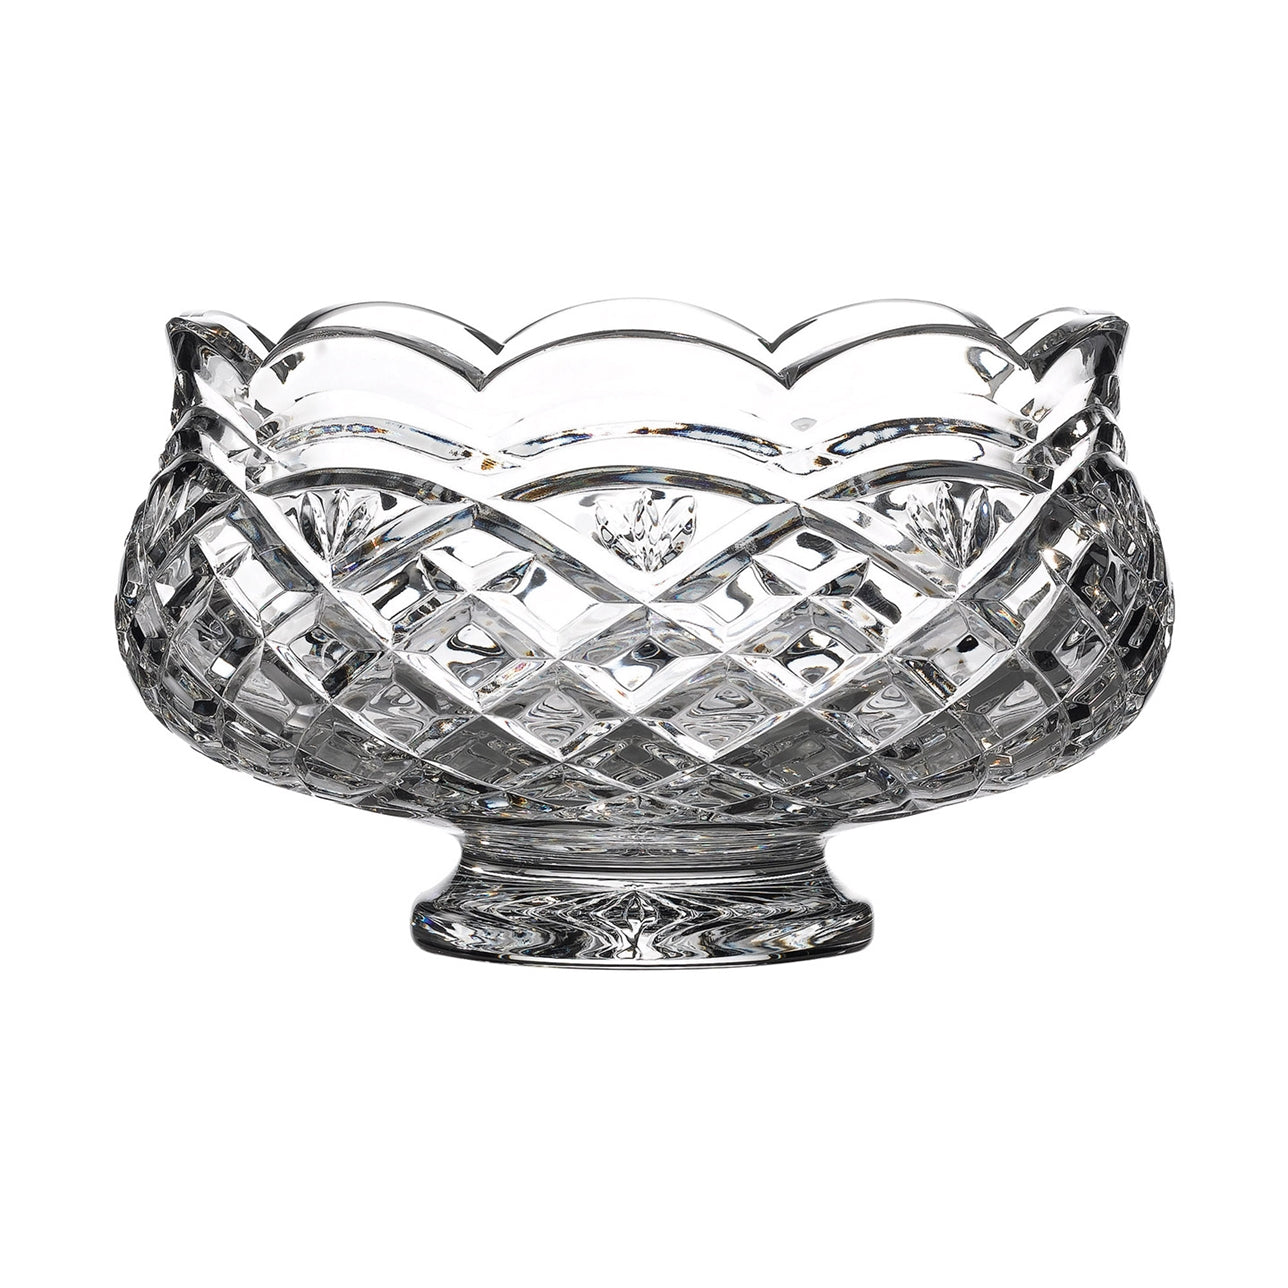 Waterford Crystal Heritage 20cm Footed Bowl  Made in Ireland, Waterford's Heritage Collection illustrates Waterford's commitment to produce iconic pieces that have been beloved for generations, some that date back to the 17th century. This stunning Footed bowl is guaranteed to make an impressive statement on your table or counter.